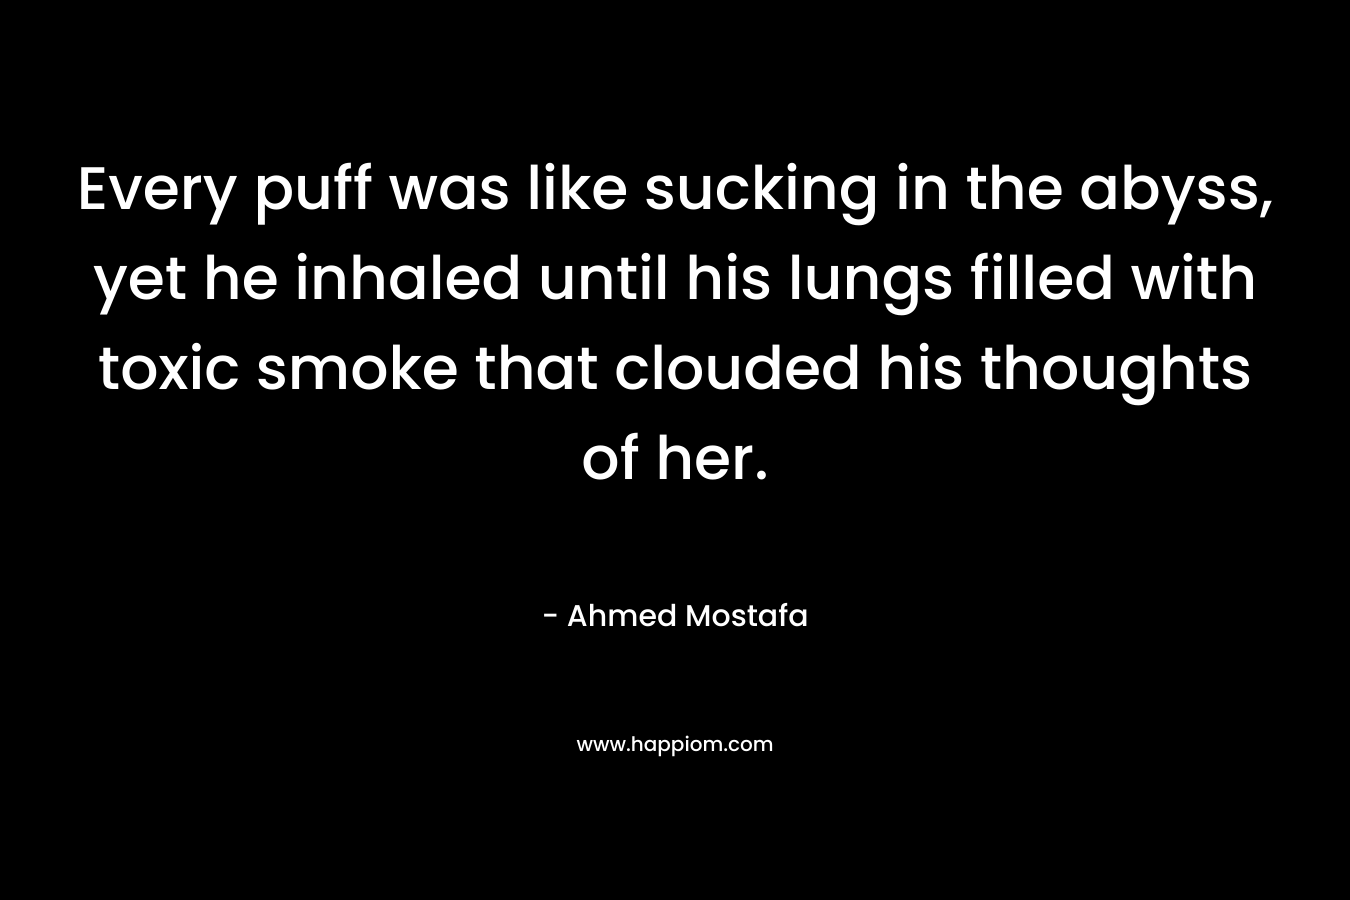 Every puff was like sucking in the abyss, yet he inhaled until his lungs filled with toxic smoke that clouded his thoughts of her. – Ahmed Mostafa